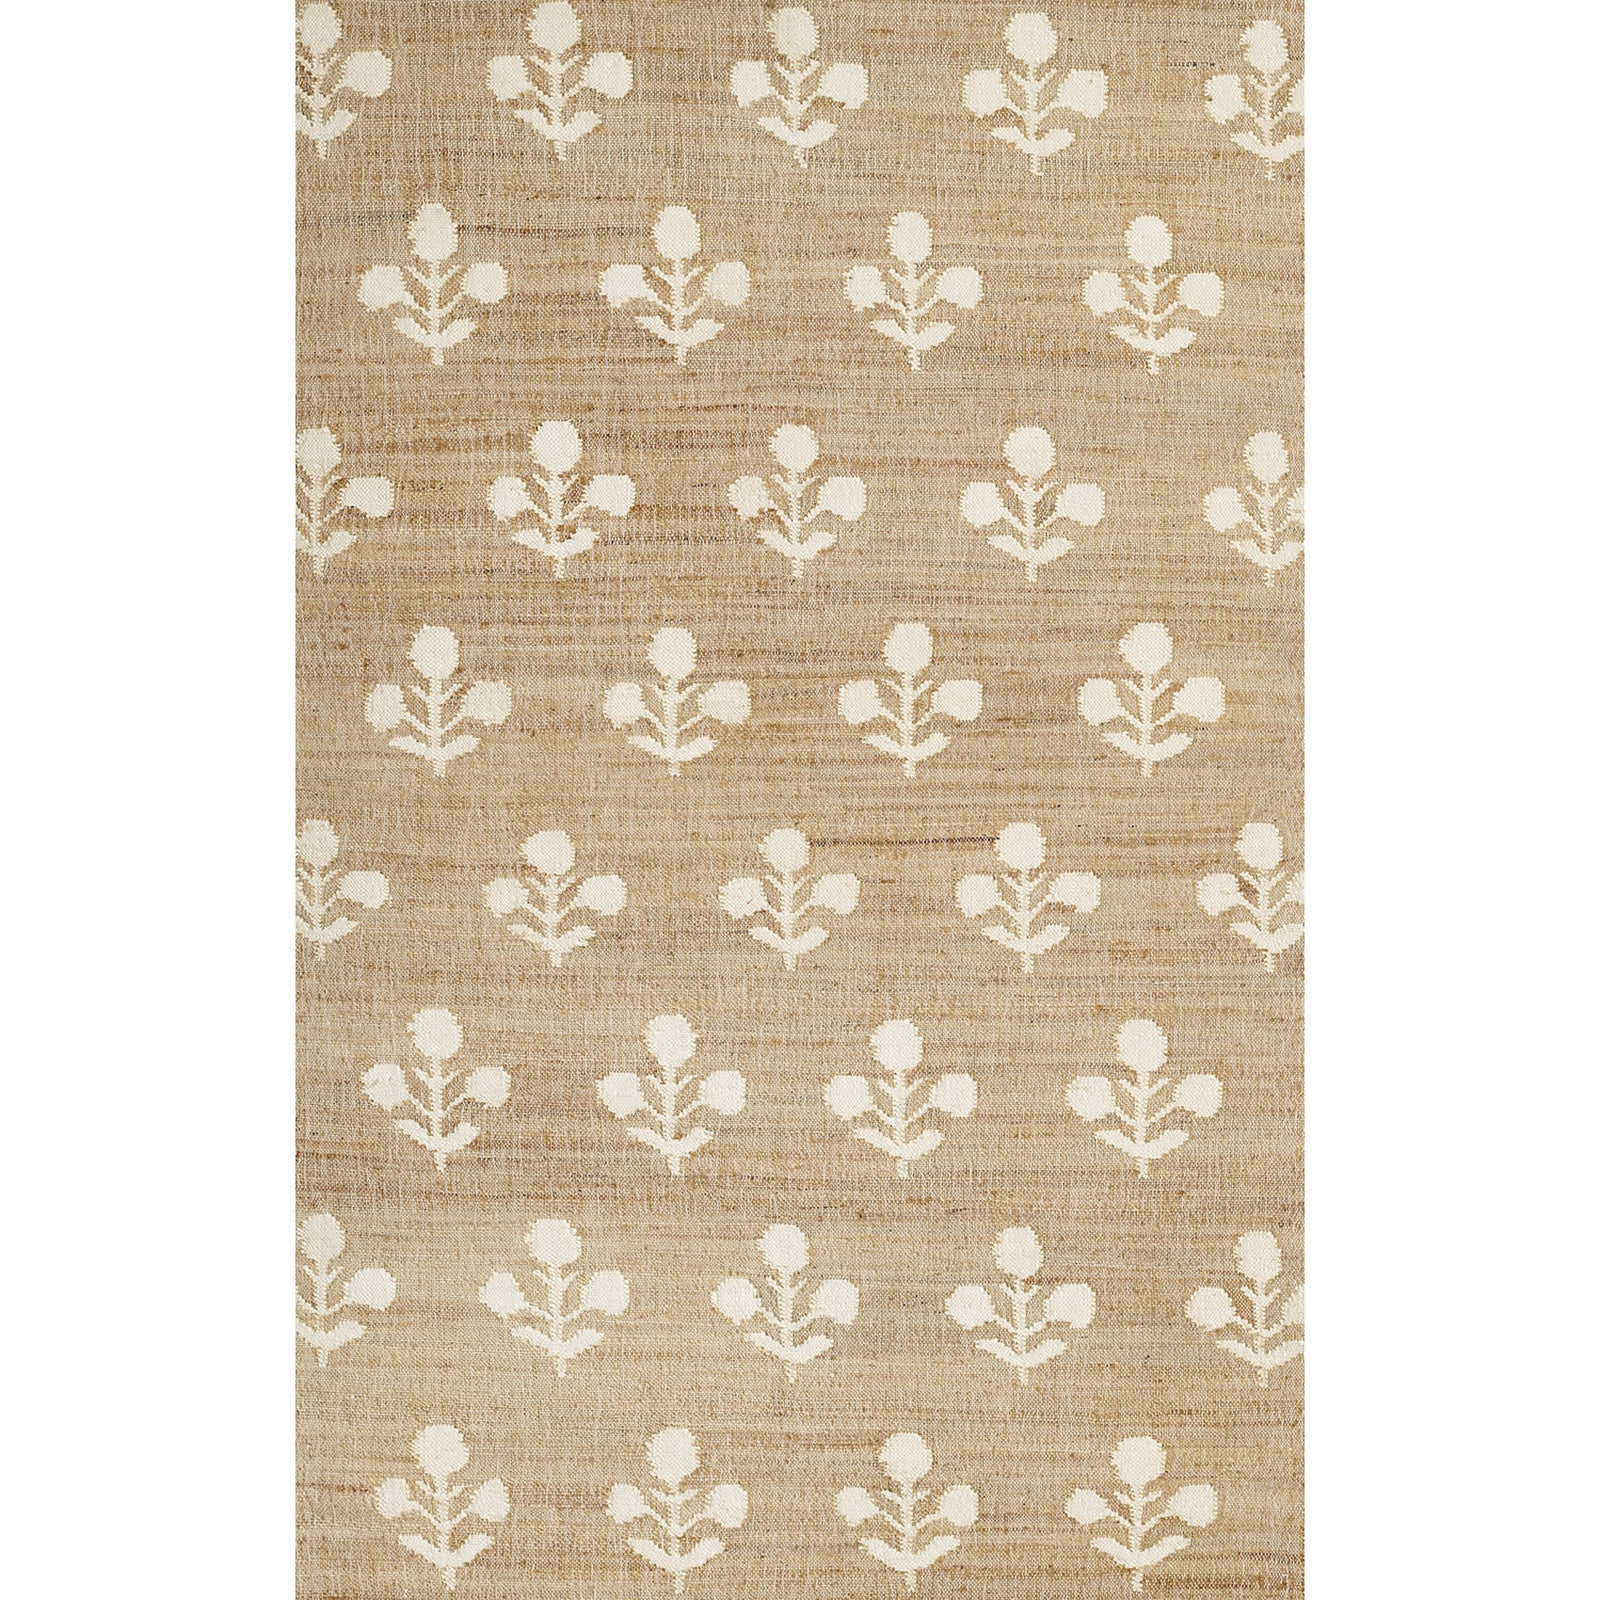 Erin Gates by Momeni Orchard Bloom Natural Hand Woven Wool and Jute Area Rug